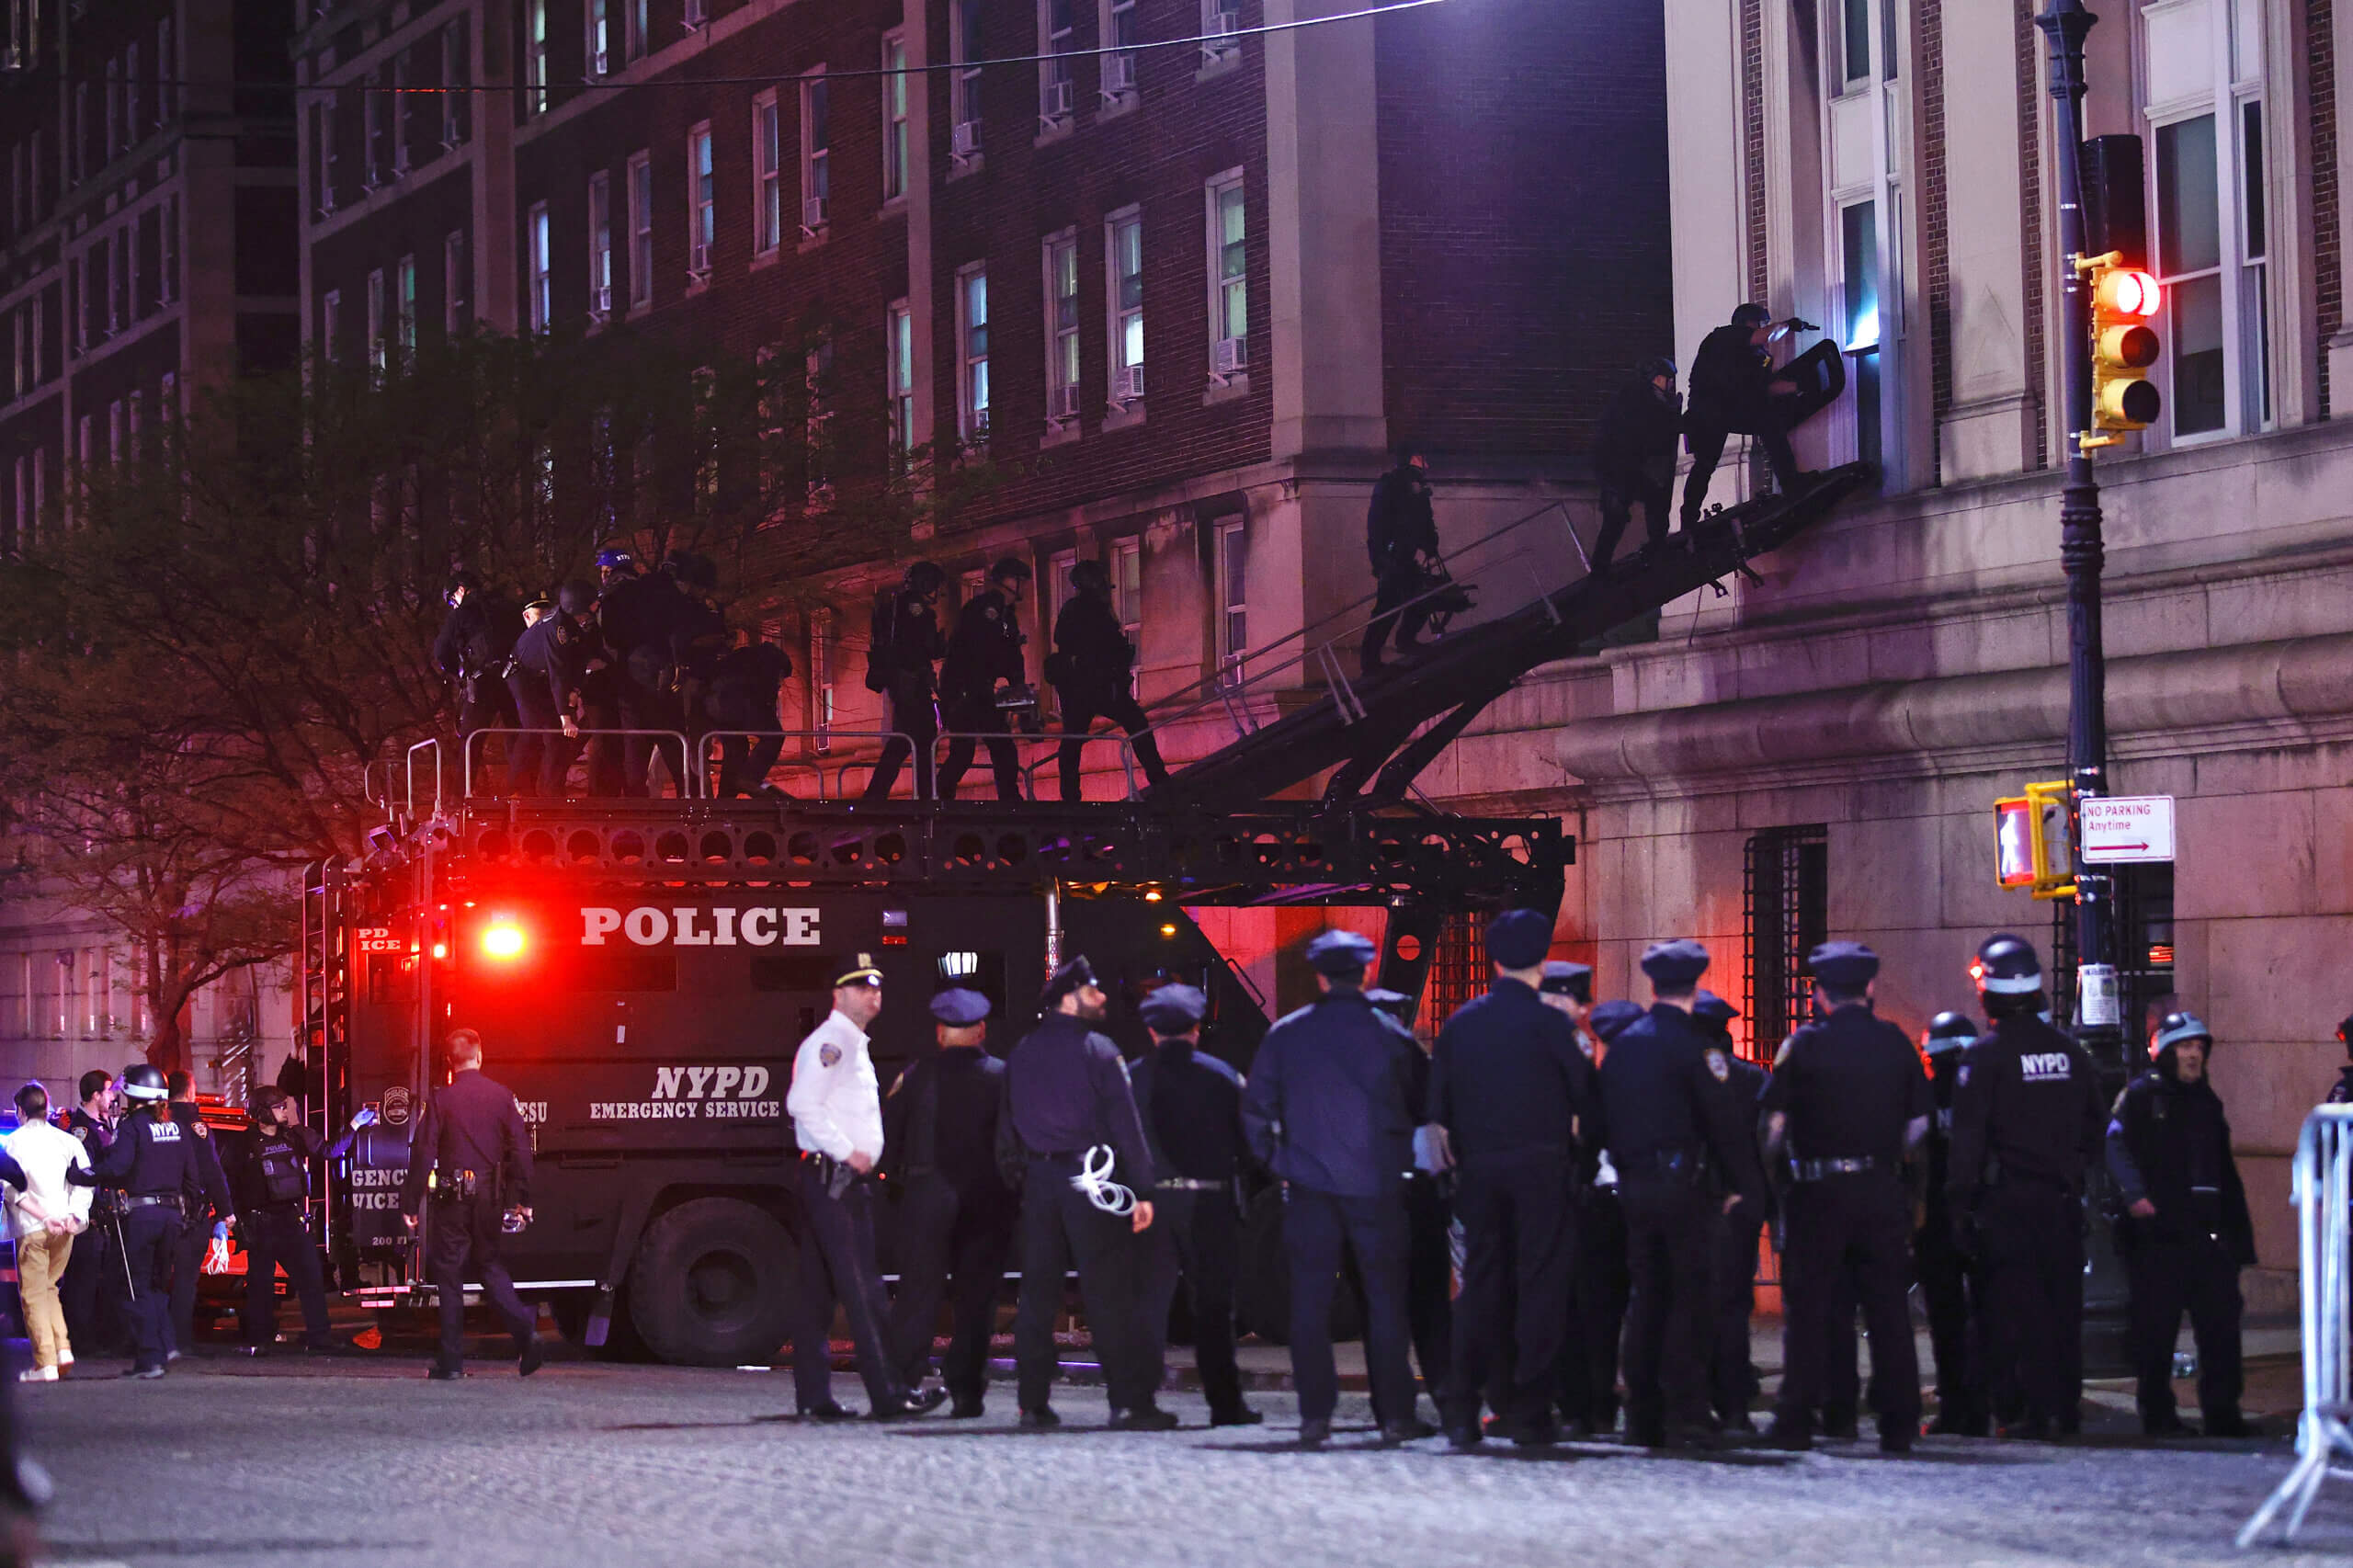 COLUMBIA UNIVERSITY NYPD PROTESTERS